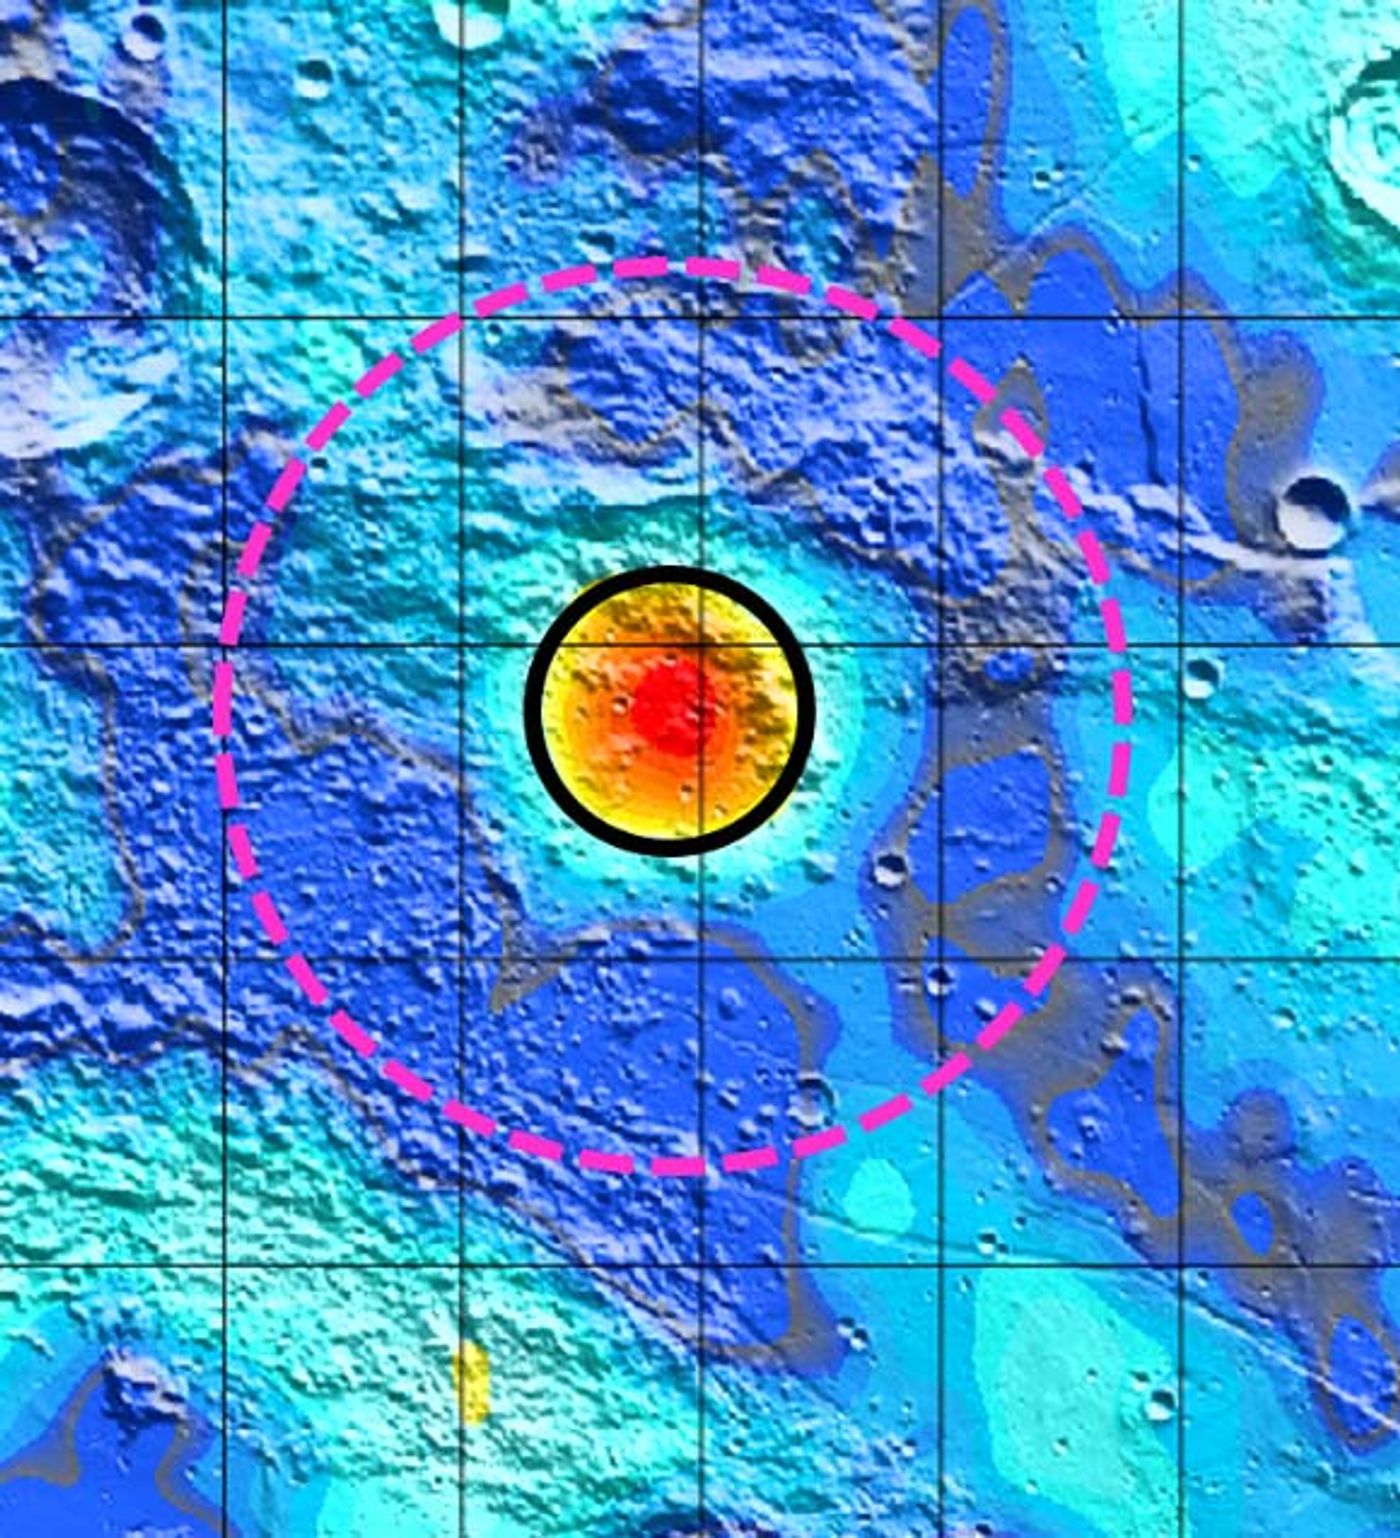 The Earhart crater, a previously unknown lunar crater, is outlined in the magenta dash circle.